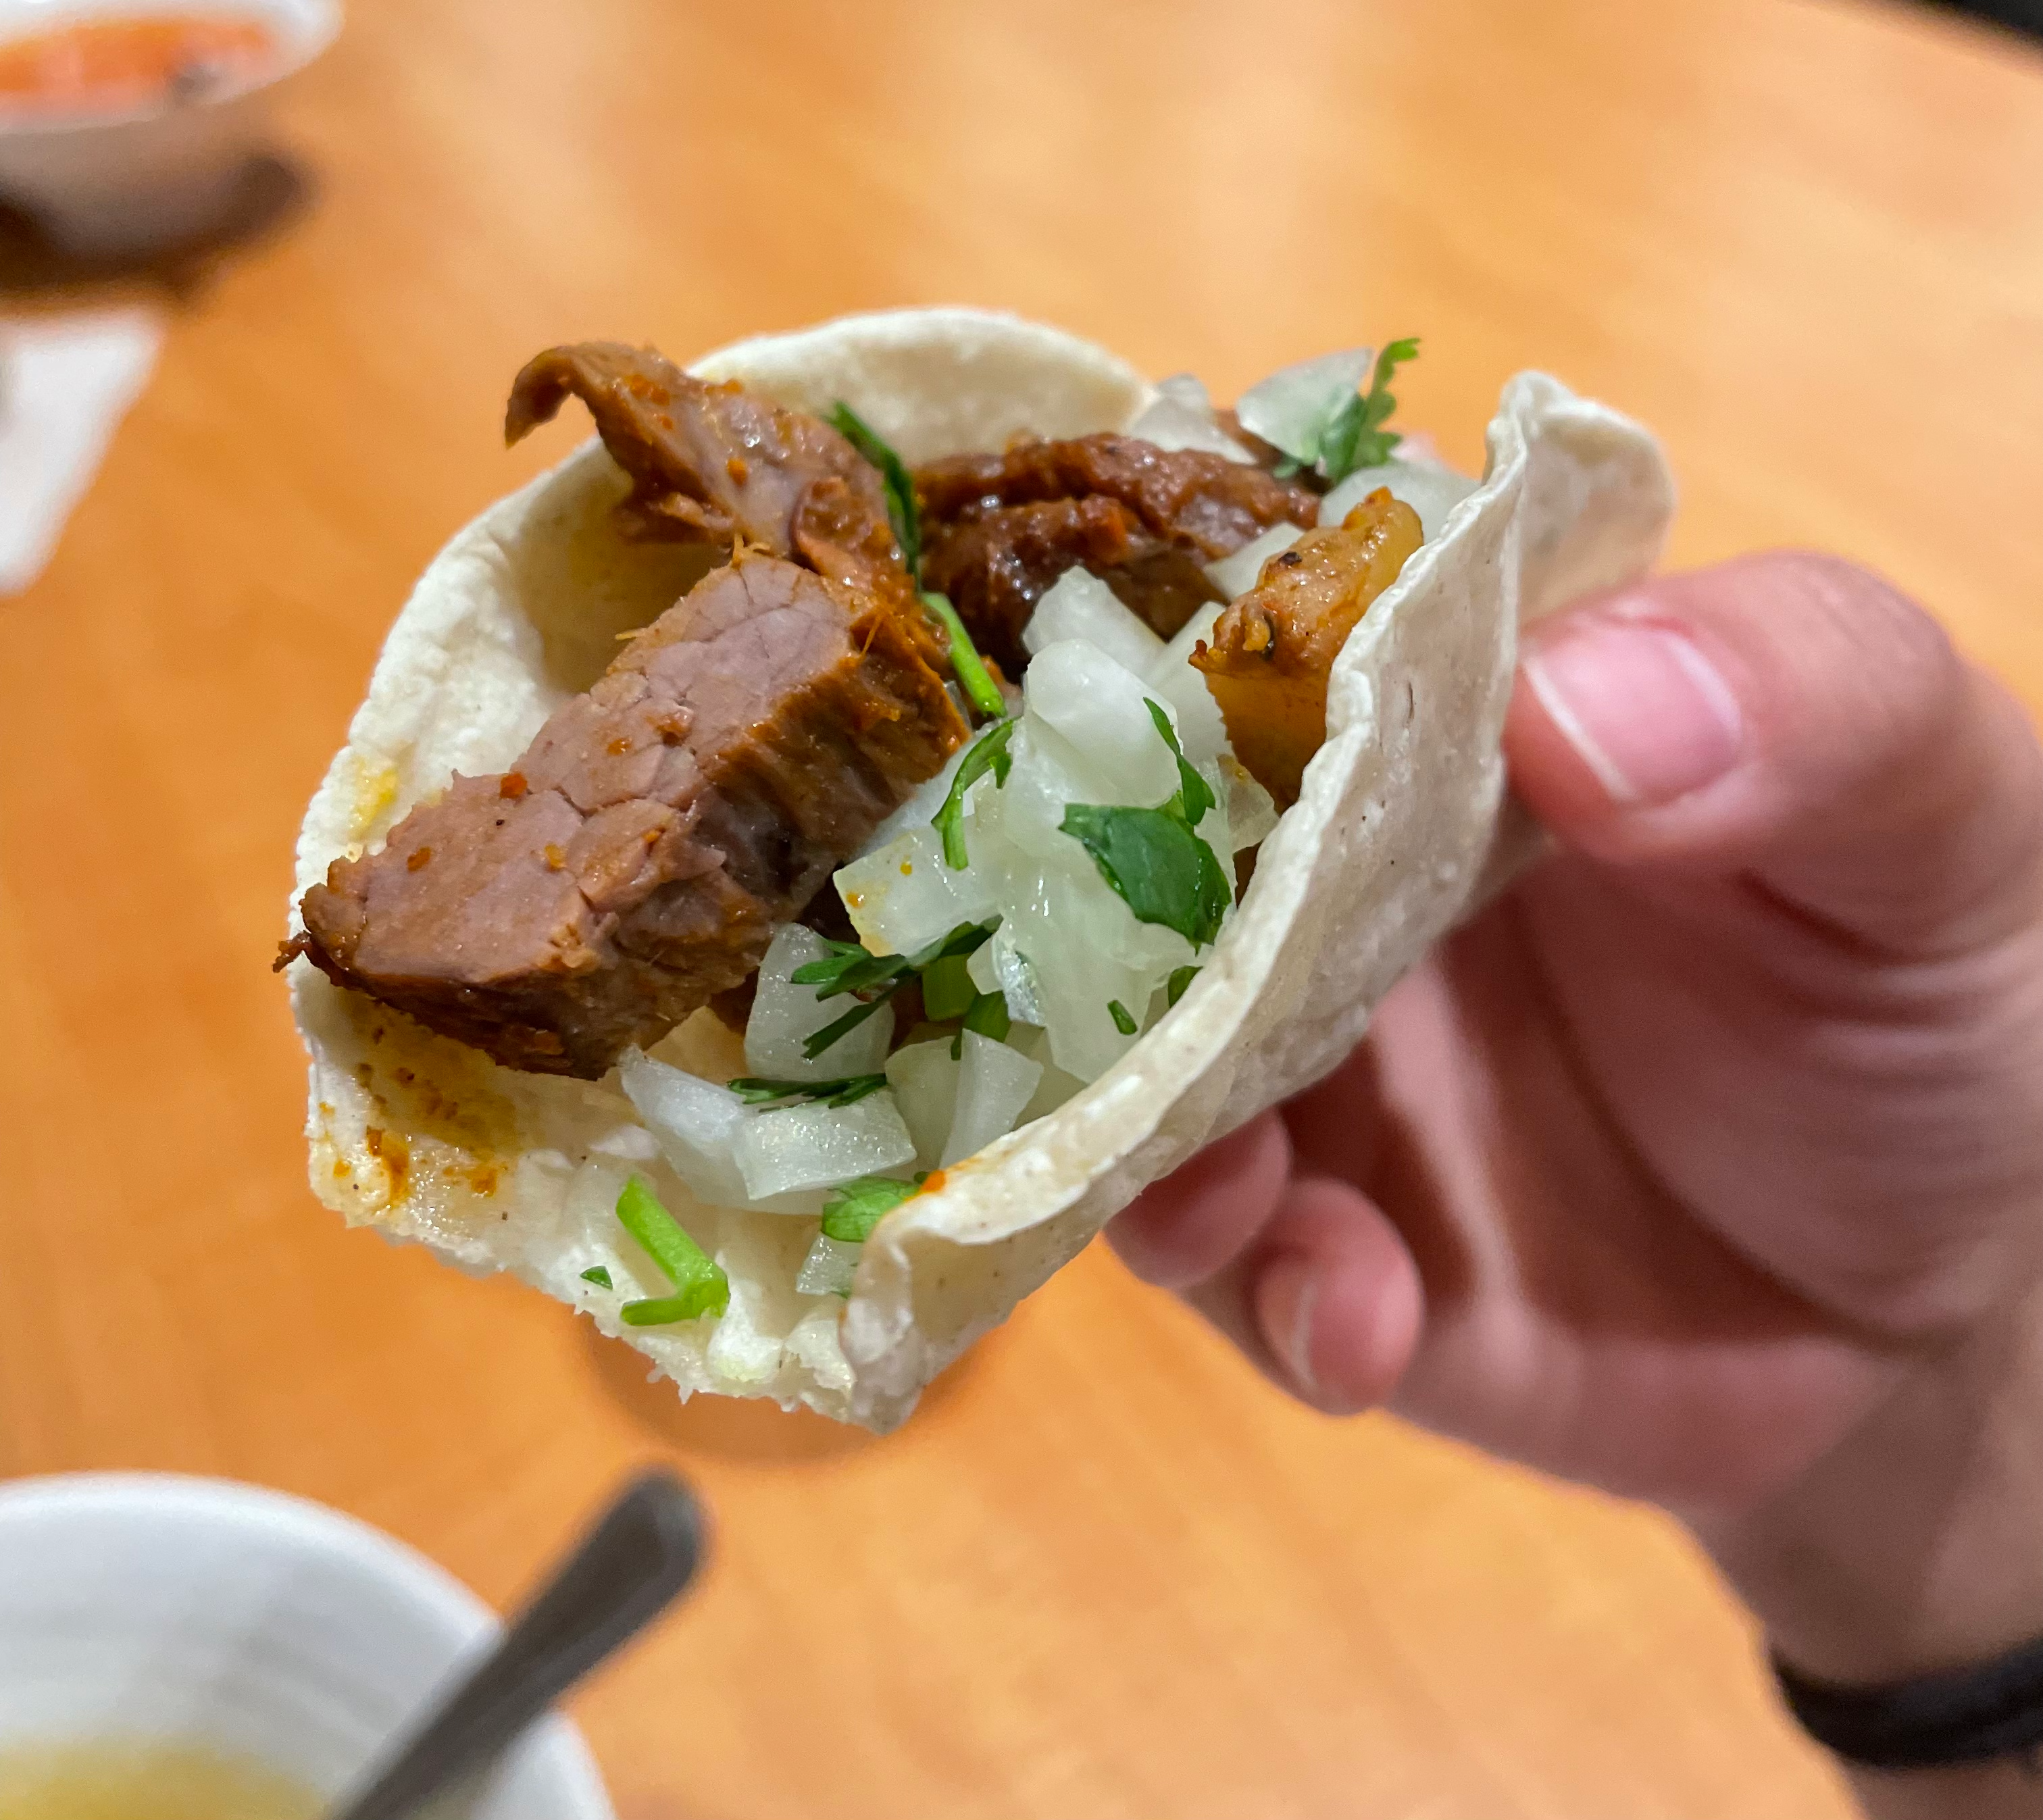 Carne asada taco from the Bistro line